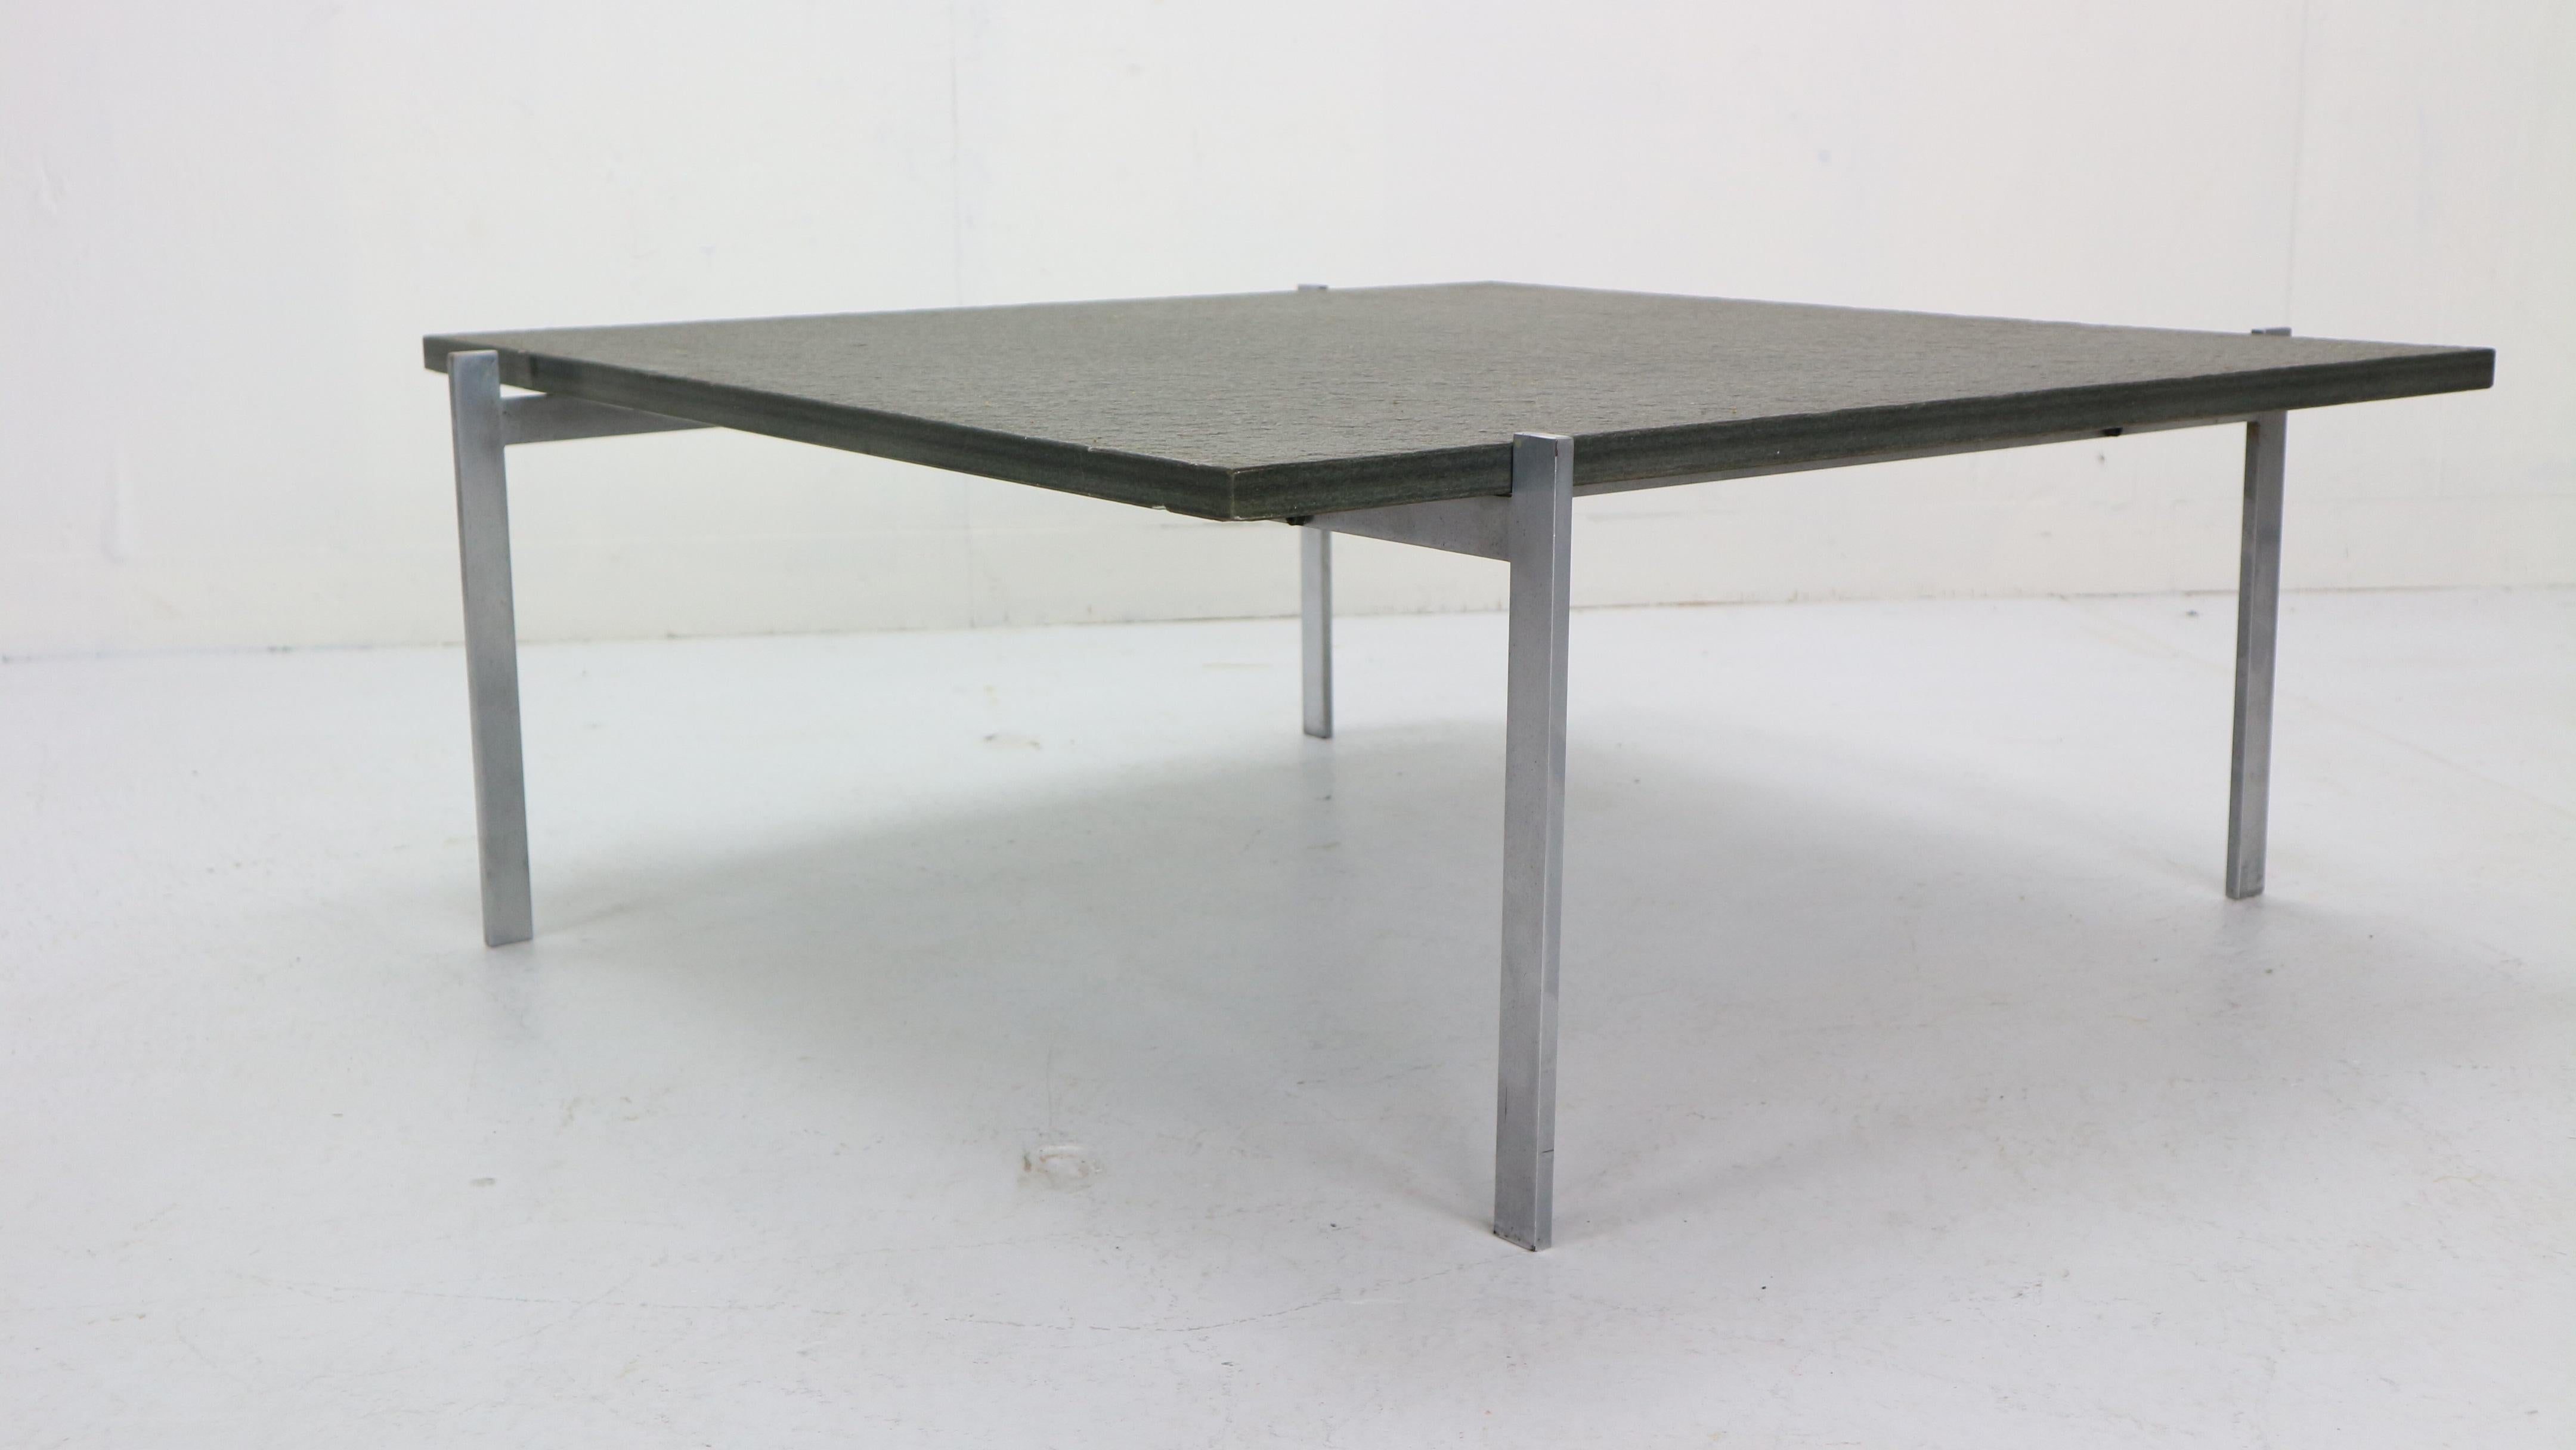 Minimalist and world known coffee table designed by Poul Kjærholm and manufactured by Ejvind Kold Christensen, Denmark, 1950s.
Model No: PK61. This original old EKC production table with solid flat steel matt chrome plated frame which has the EKC